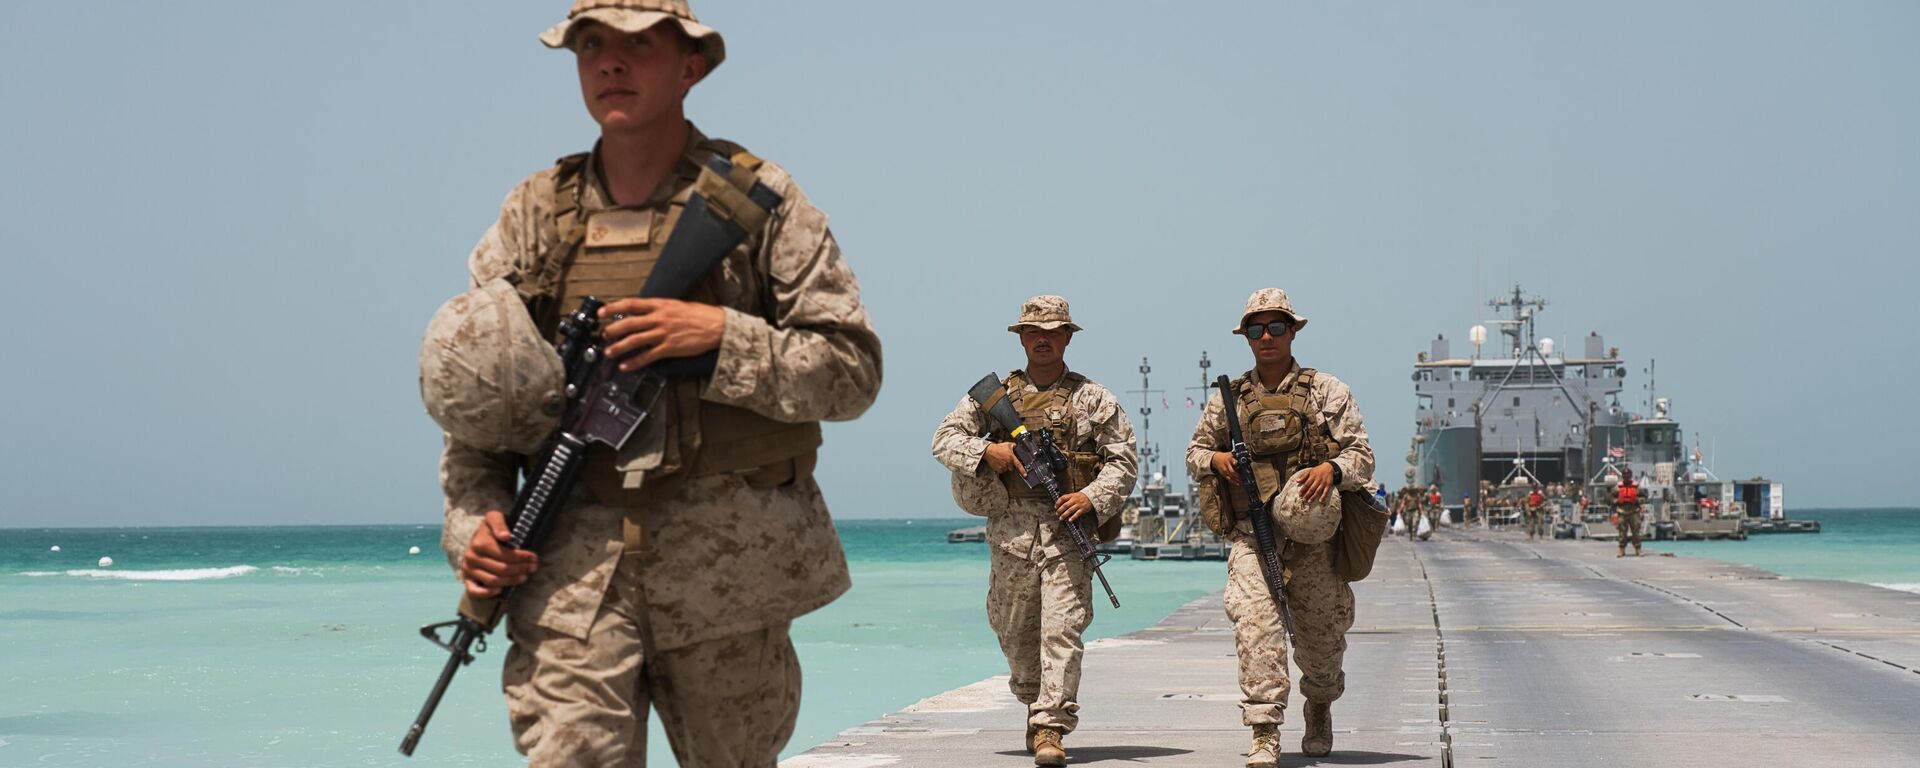 U.S. Marines walk down a removable Trident Pier leading to an American ship docked near an Emirati military base home to a Military Operations and Urban Terrain facility in al-Hamra, United Arab Emirates, Monday, March 23, 2020 - Sputnik International, 1920, 23.05.2024